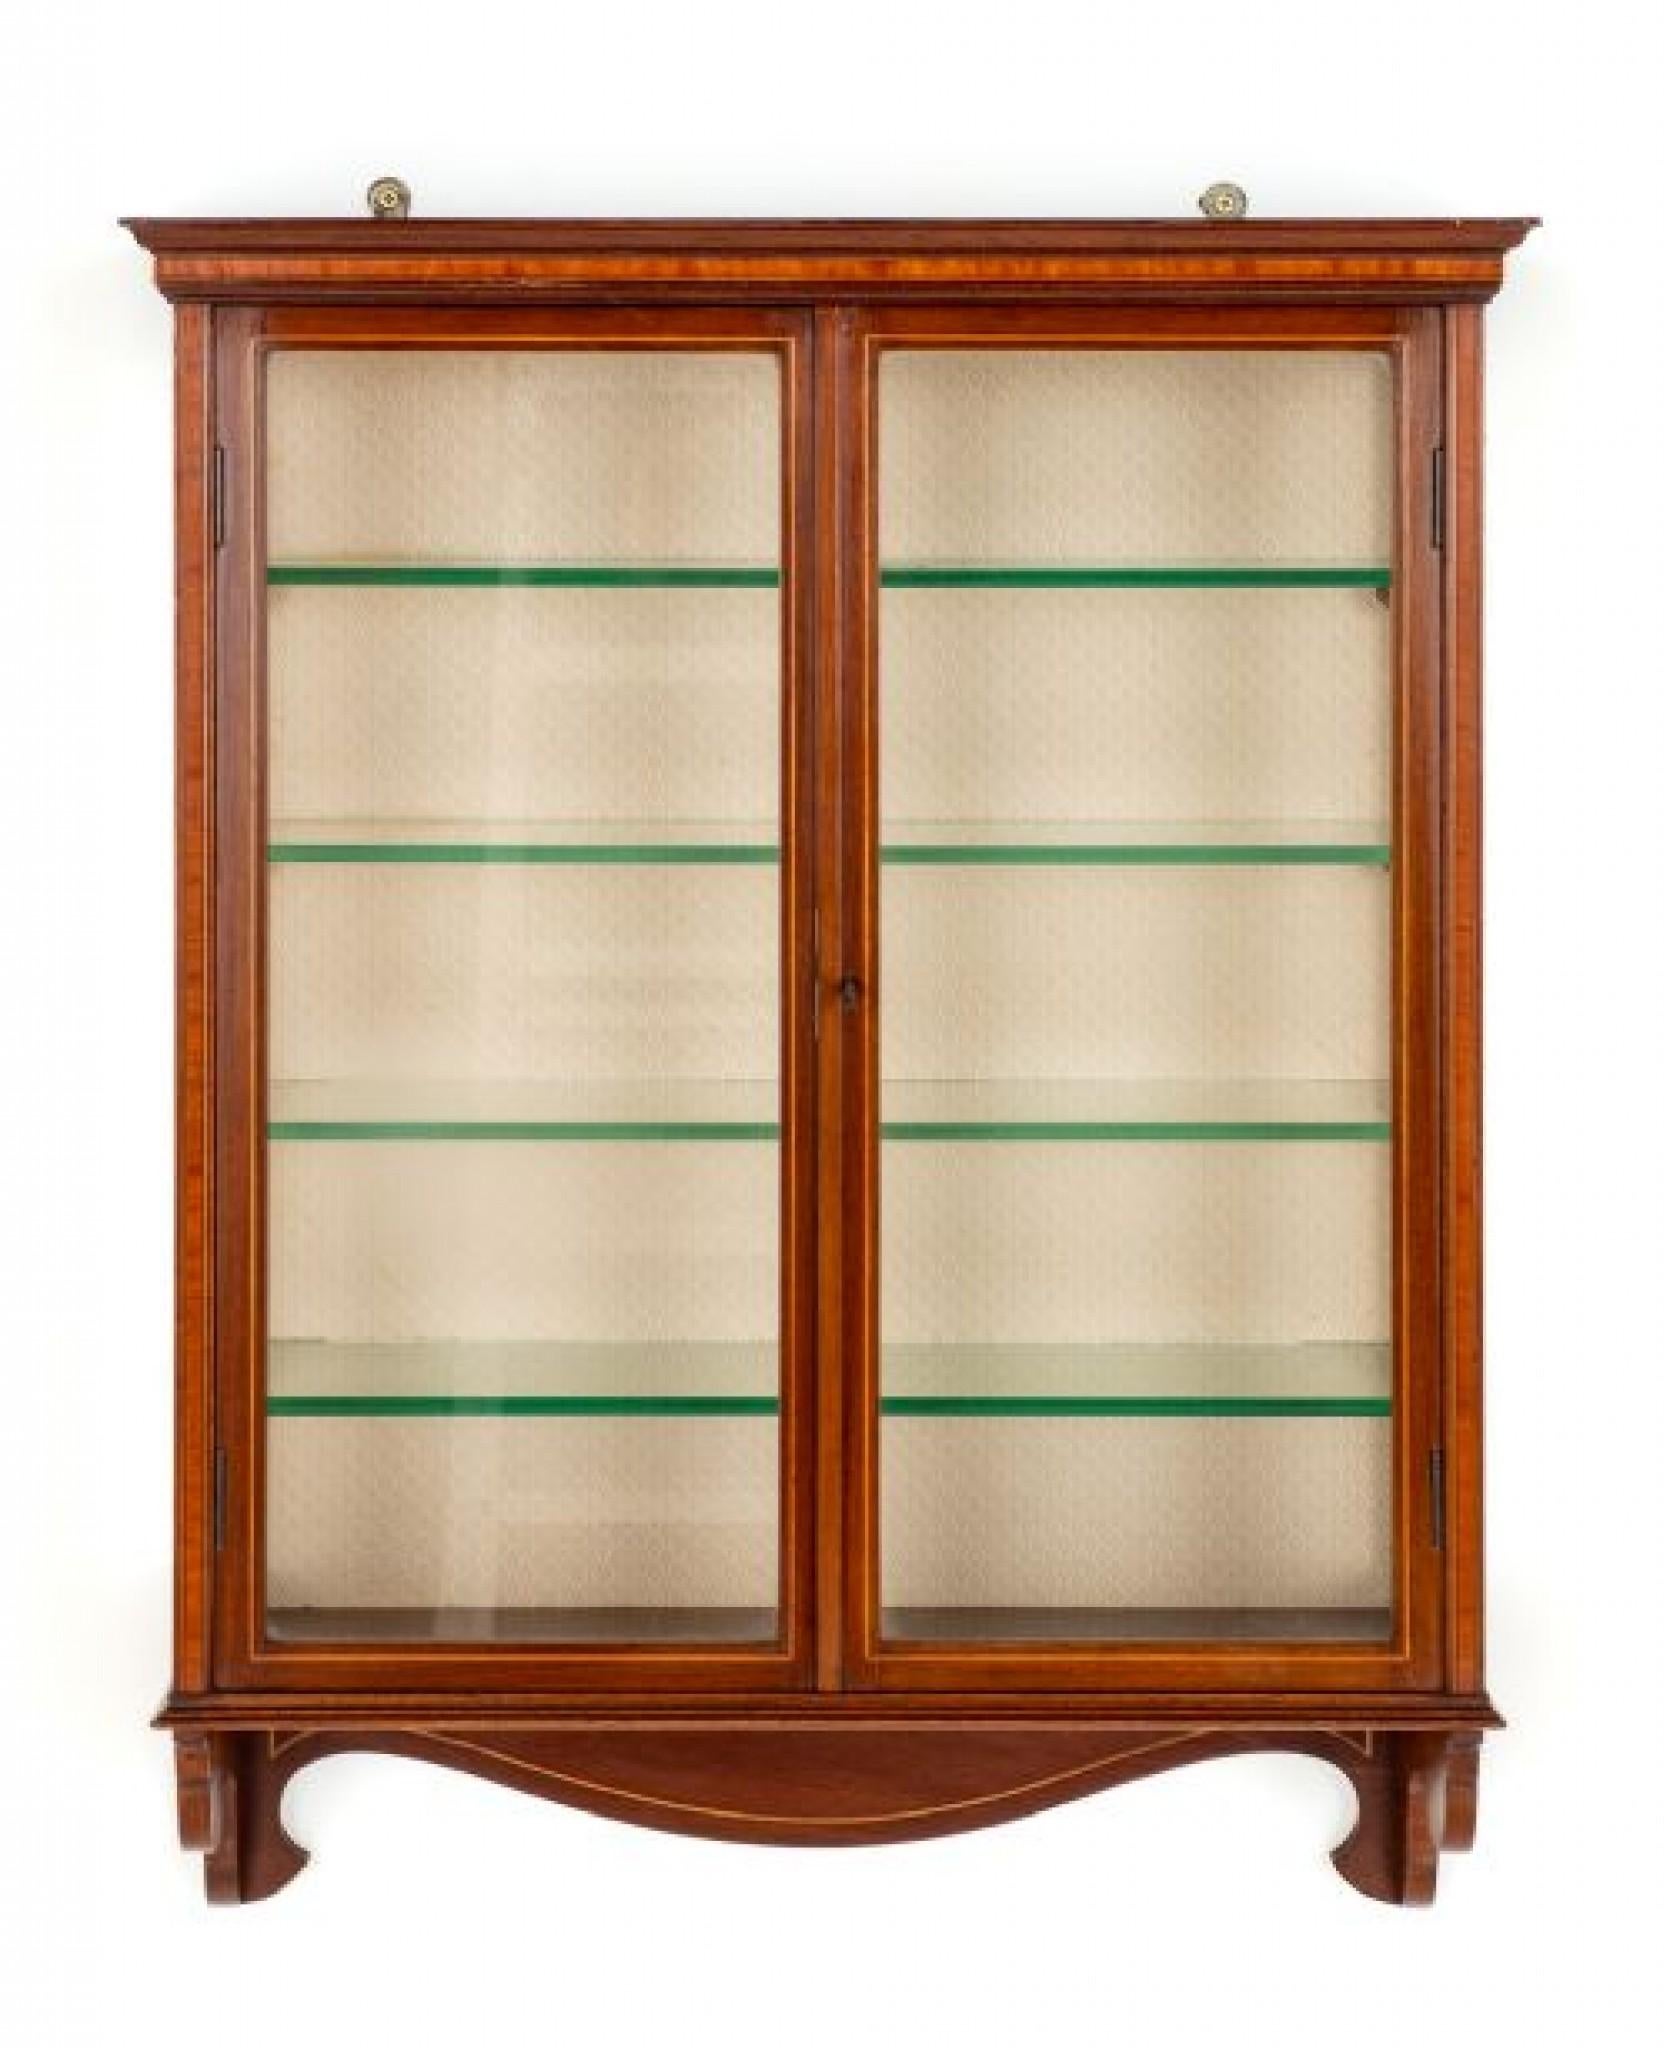 Sheraton Hanging Bookcase Wall Cabinet Revival 1880 In Good Condition For Sale In Potters Bar, GB